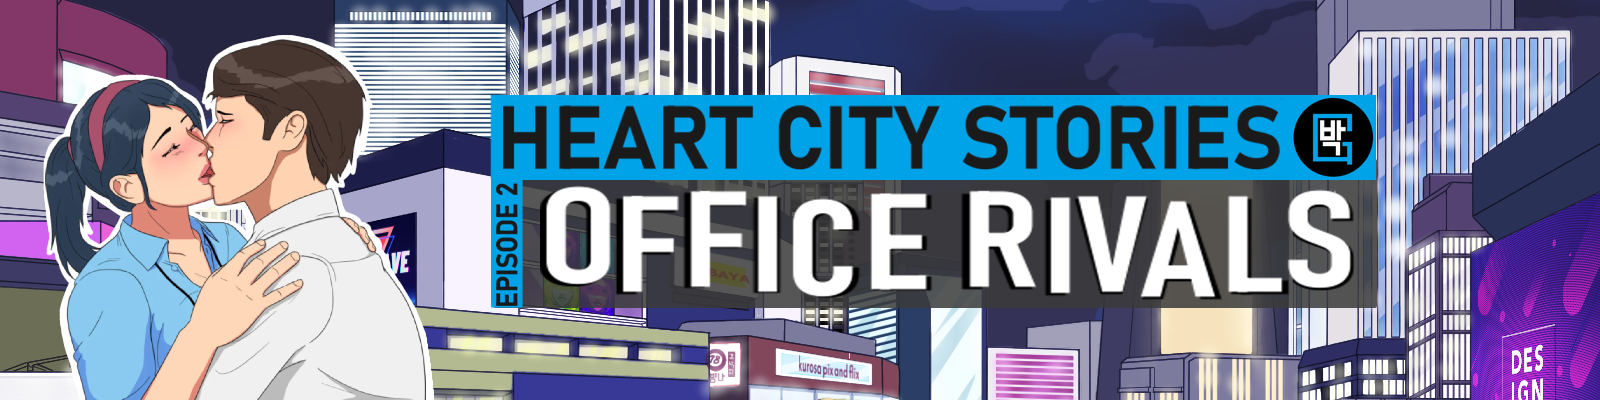 Heart City Stories Ep. 2: Office Rivals (Ch. 2)